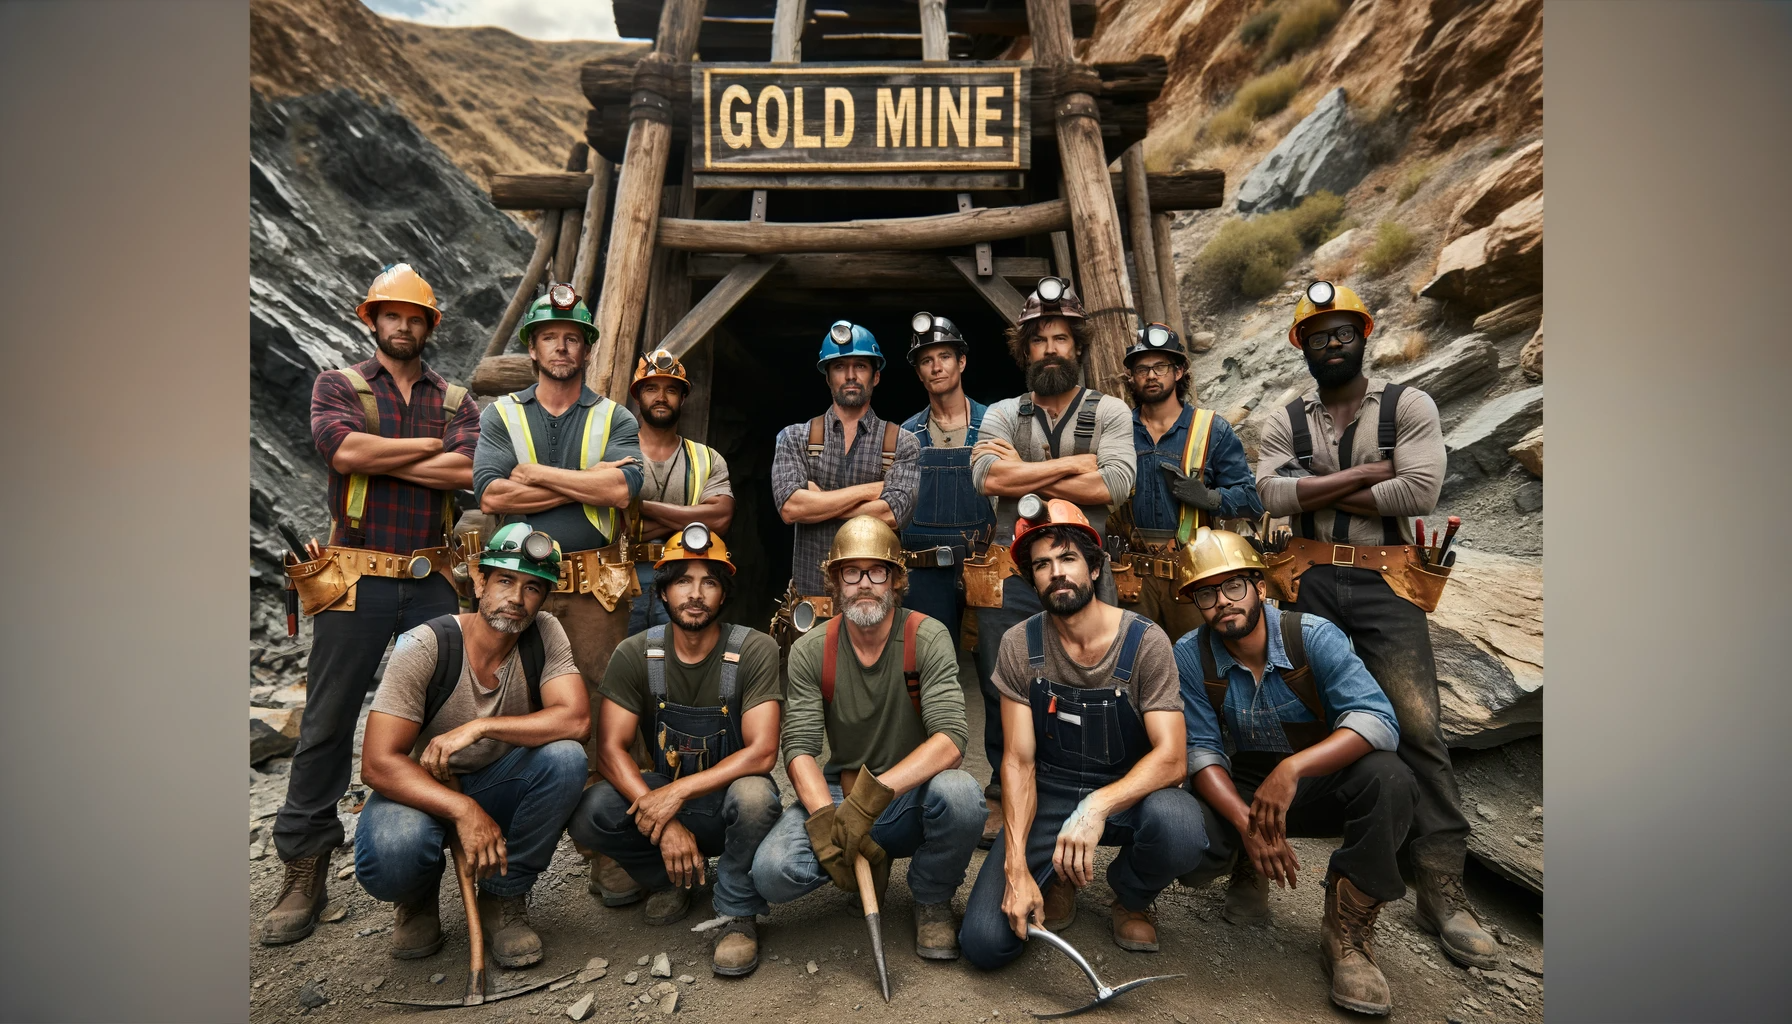 Gold miners posing in front of the mine entrance